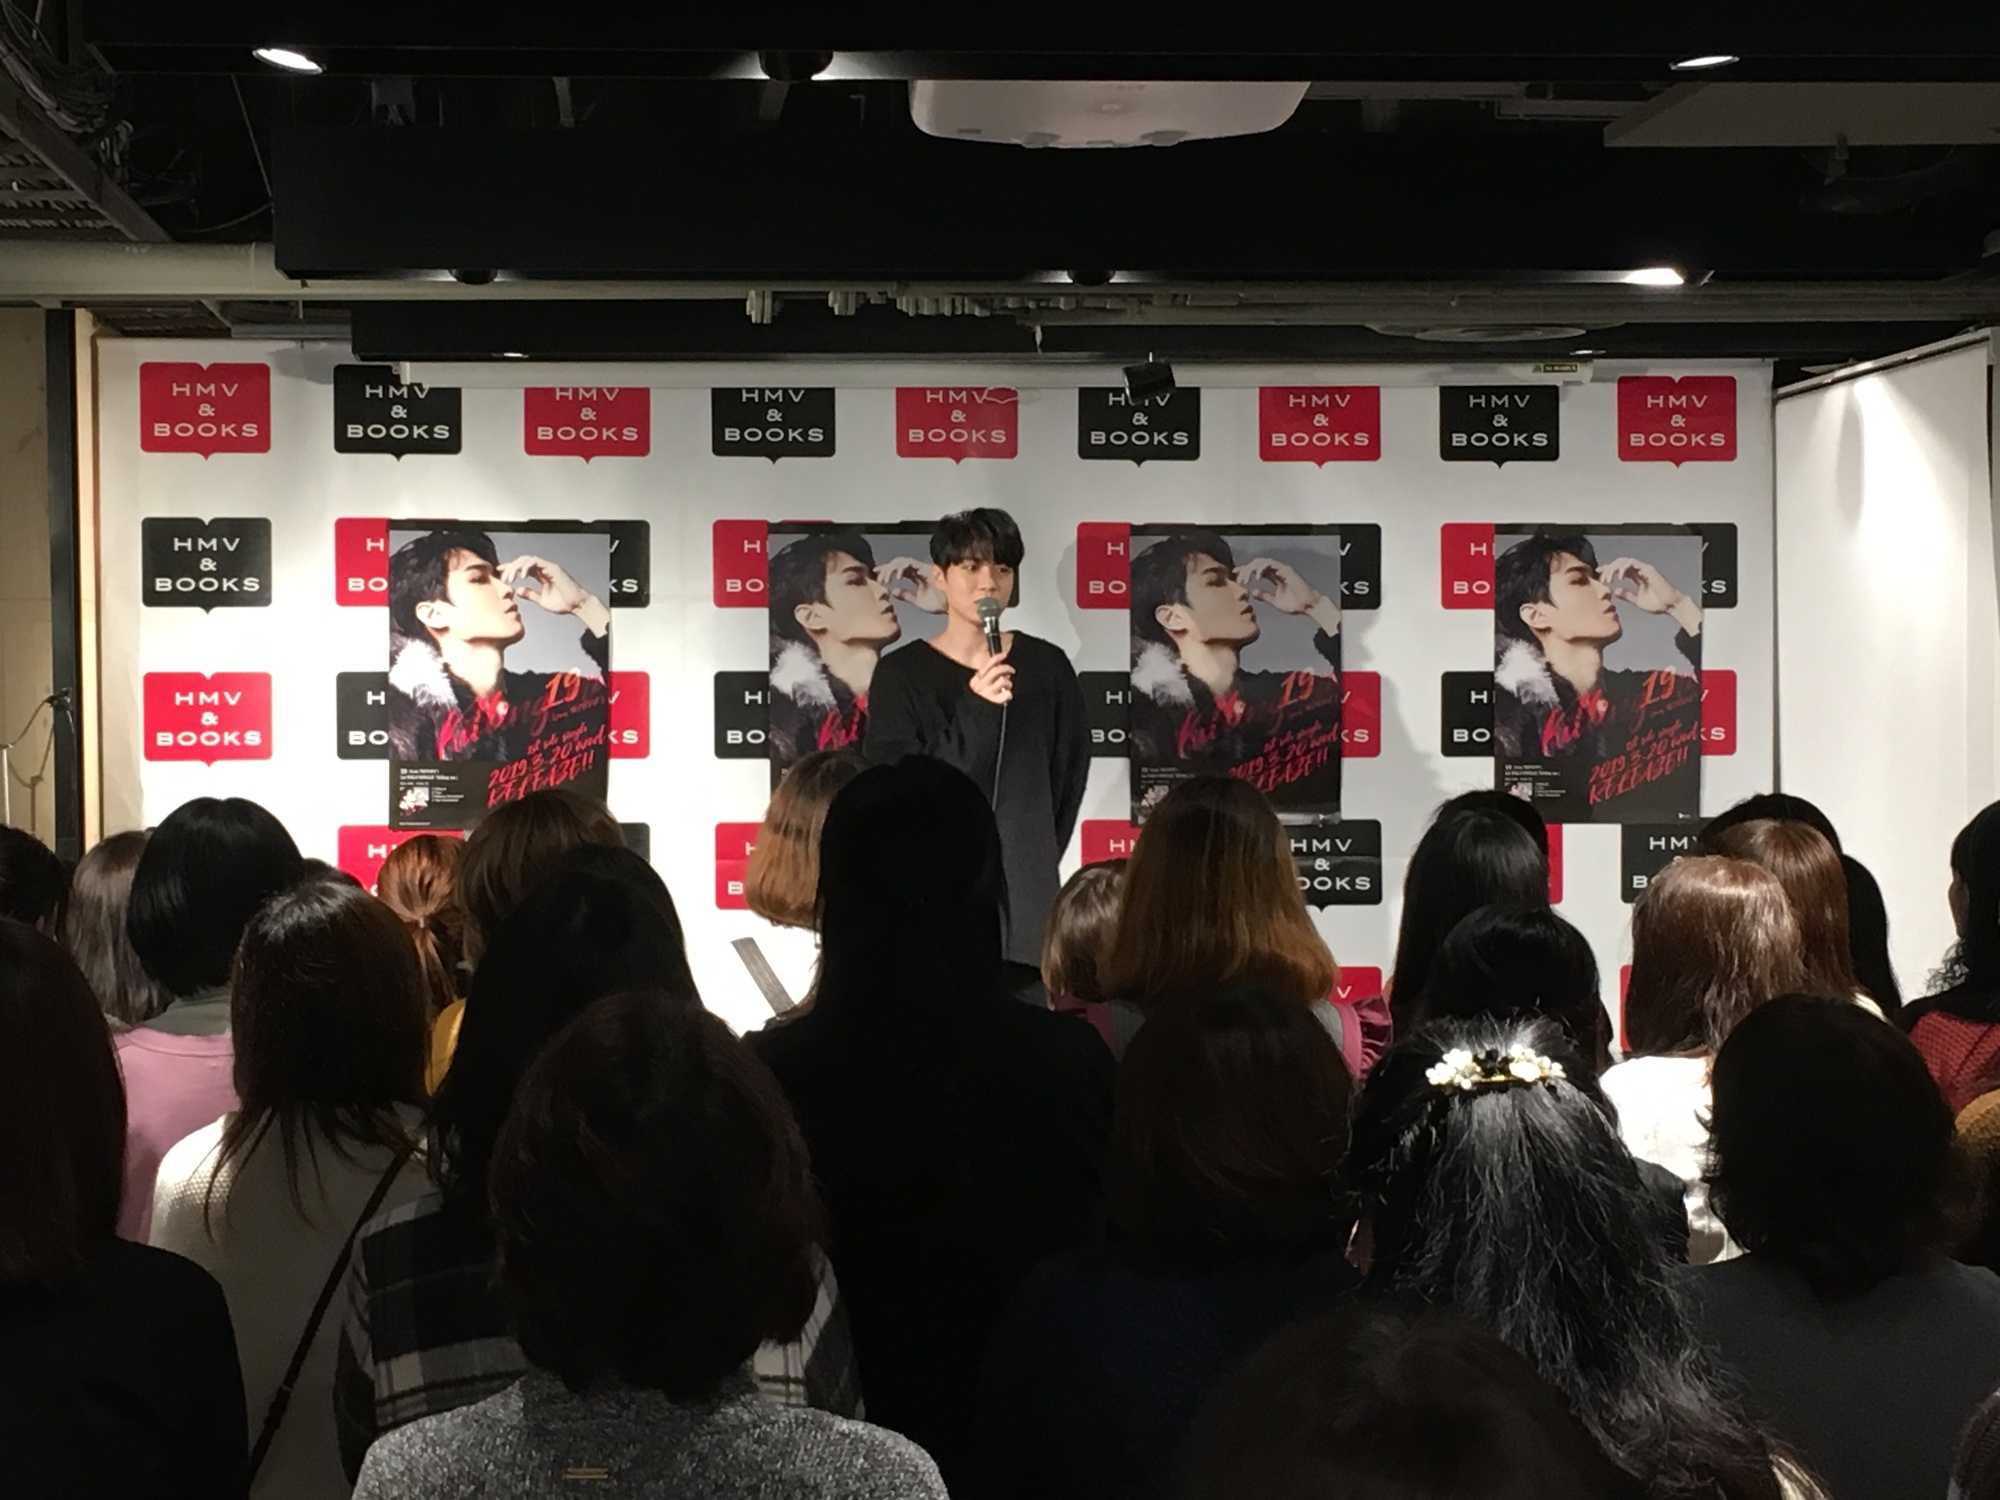 19 From Tritops 1st Solo Singleリリース記念イベント Hmv Books Shibuya ありがとうございました Tritops Japan Official Site Evergreen